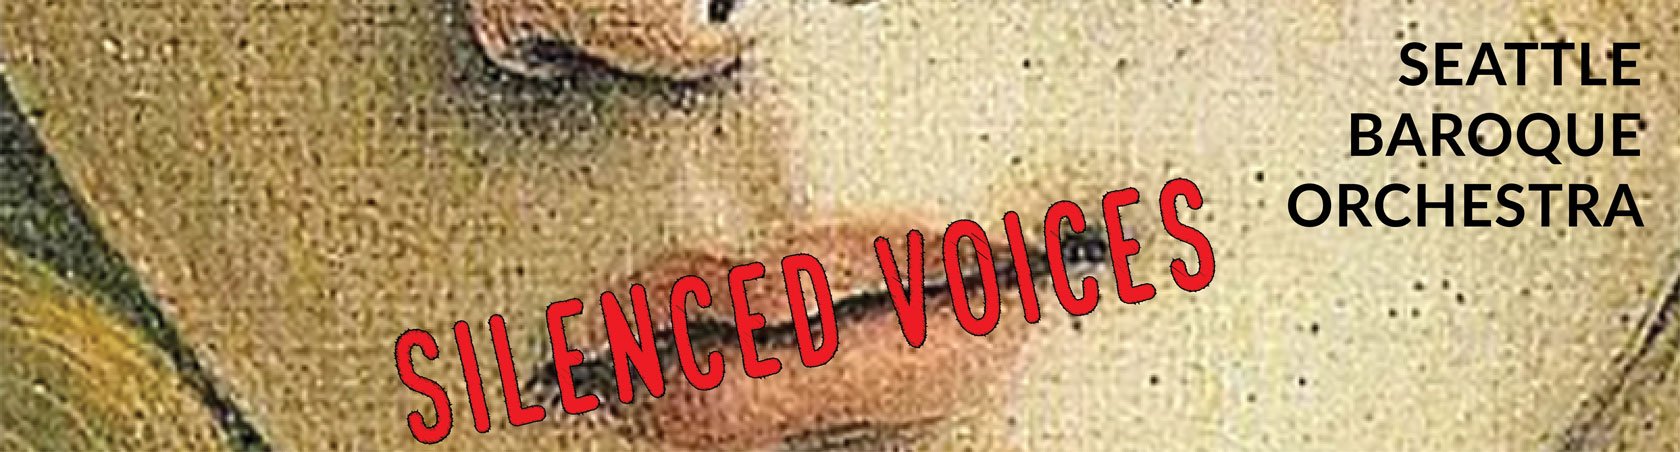 Silenced Voices by Seattle Baroque Orchestra